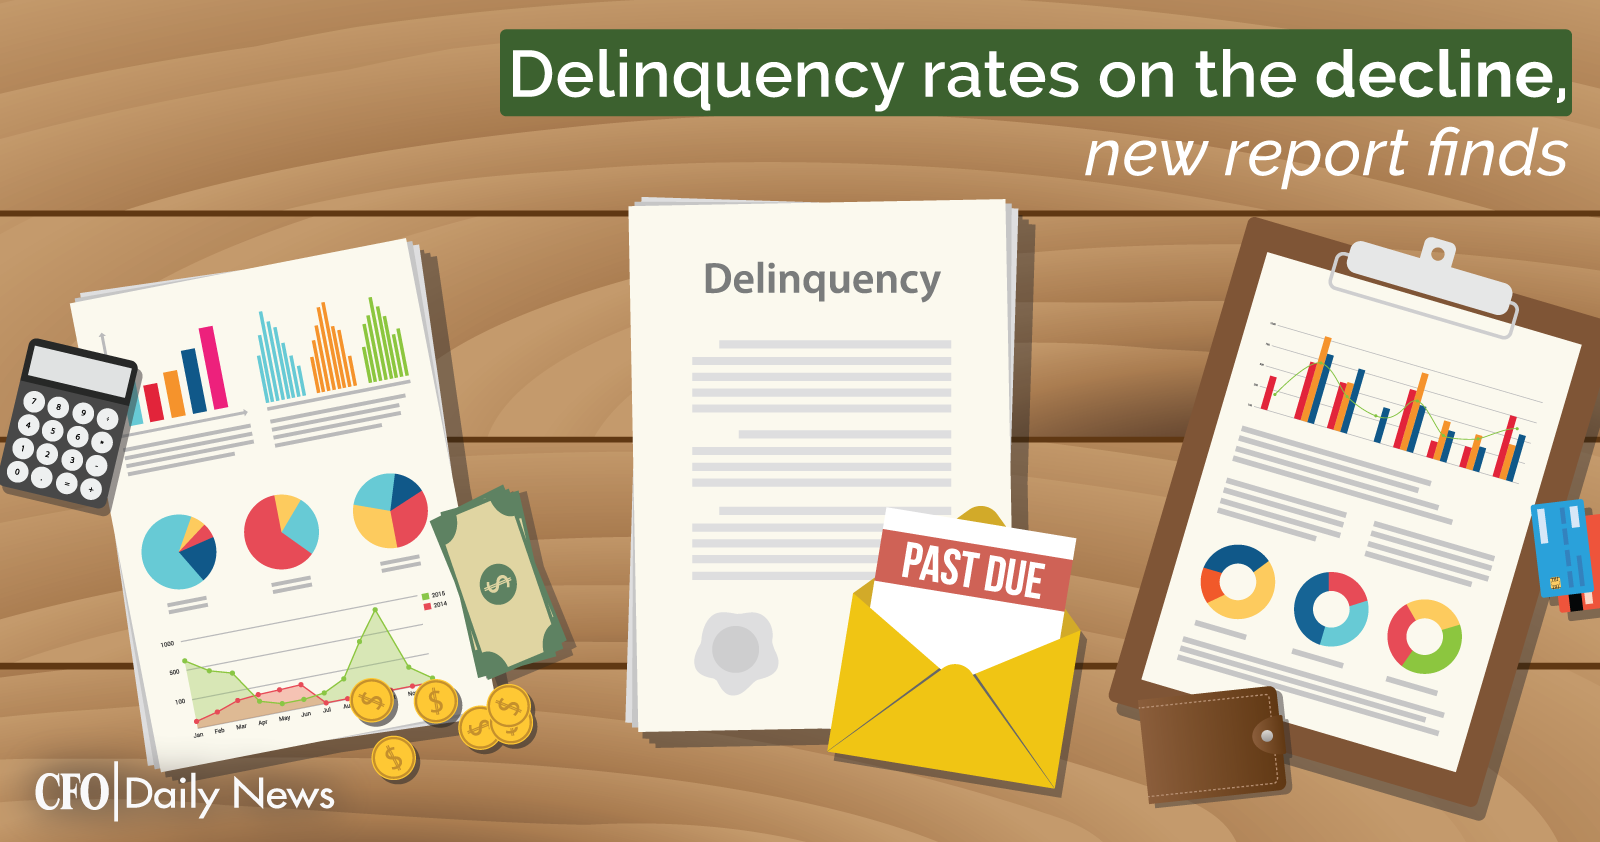 delinquency rates on the decline new report finds